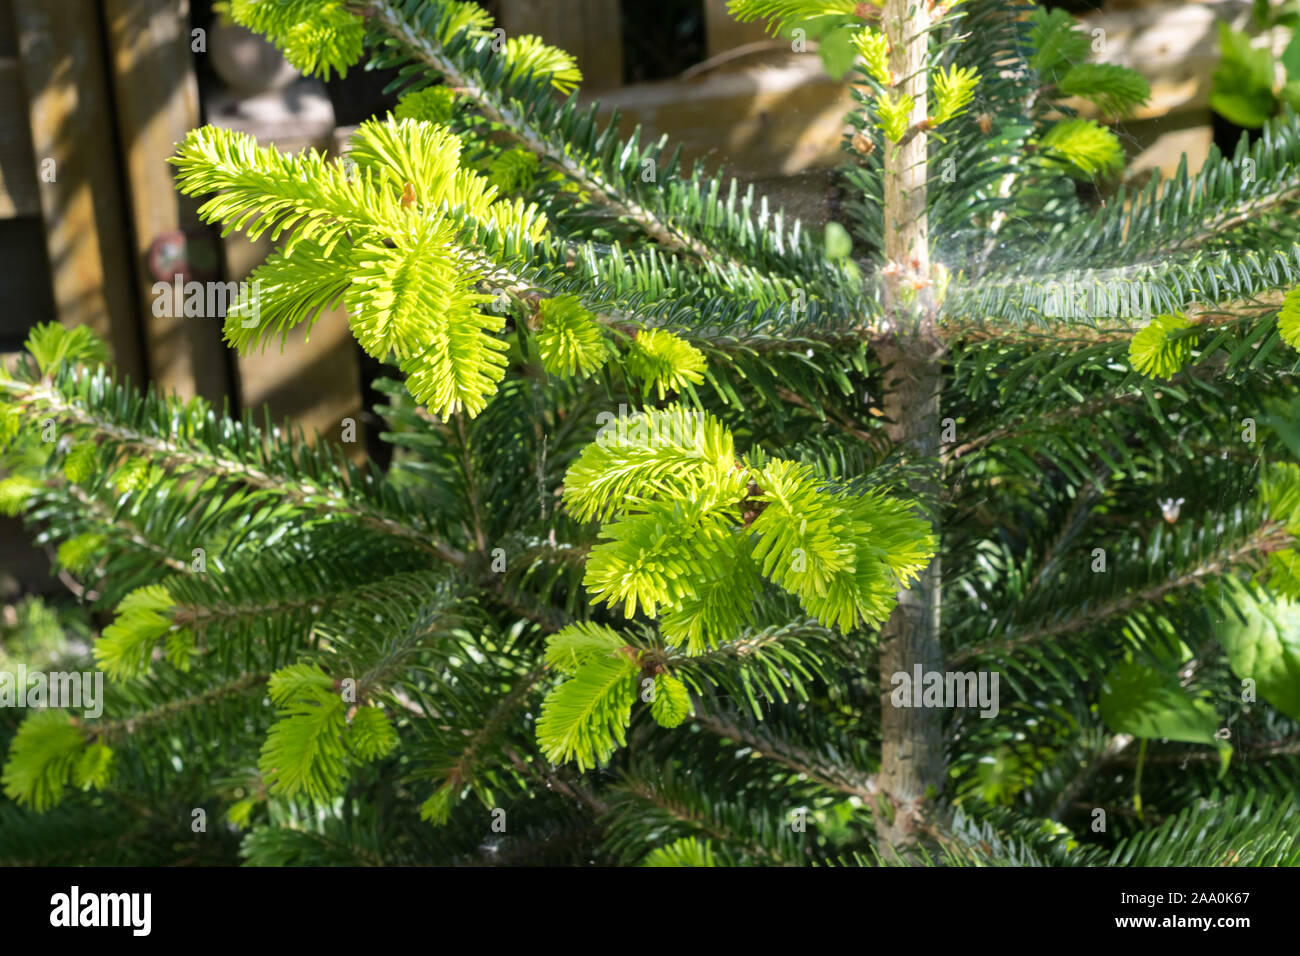 Young twigs of Abies nordmanniana (Nordmann fir) in spring Stock Photo